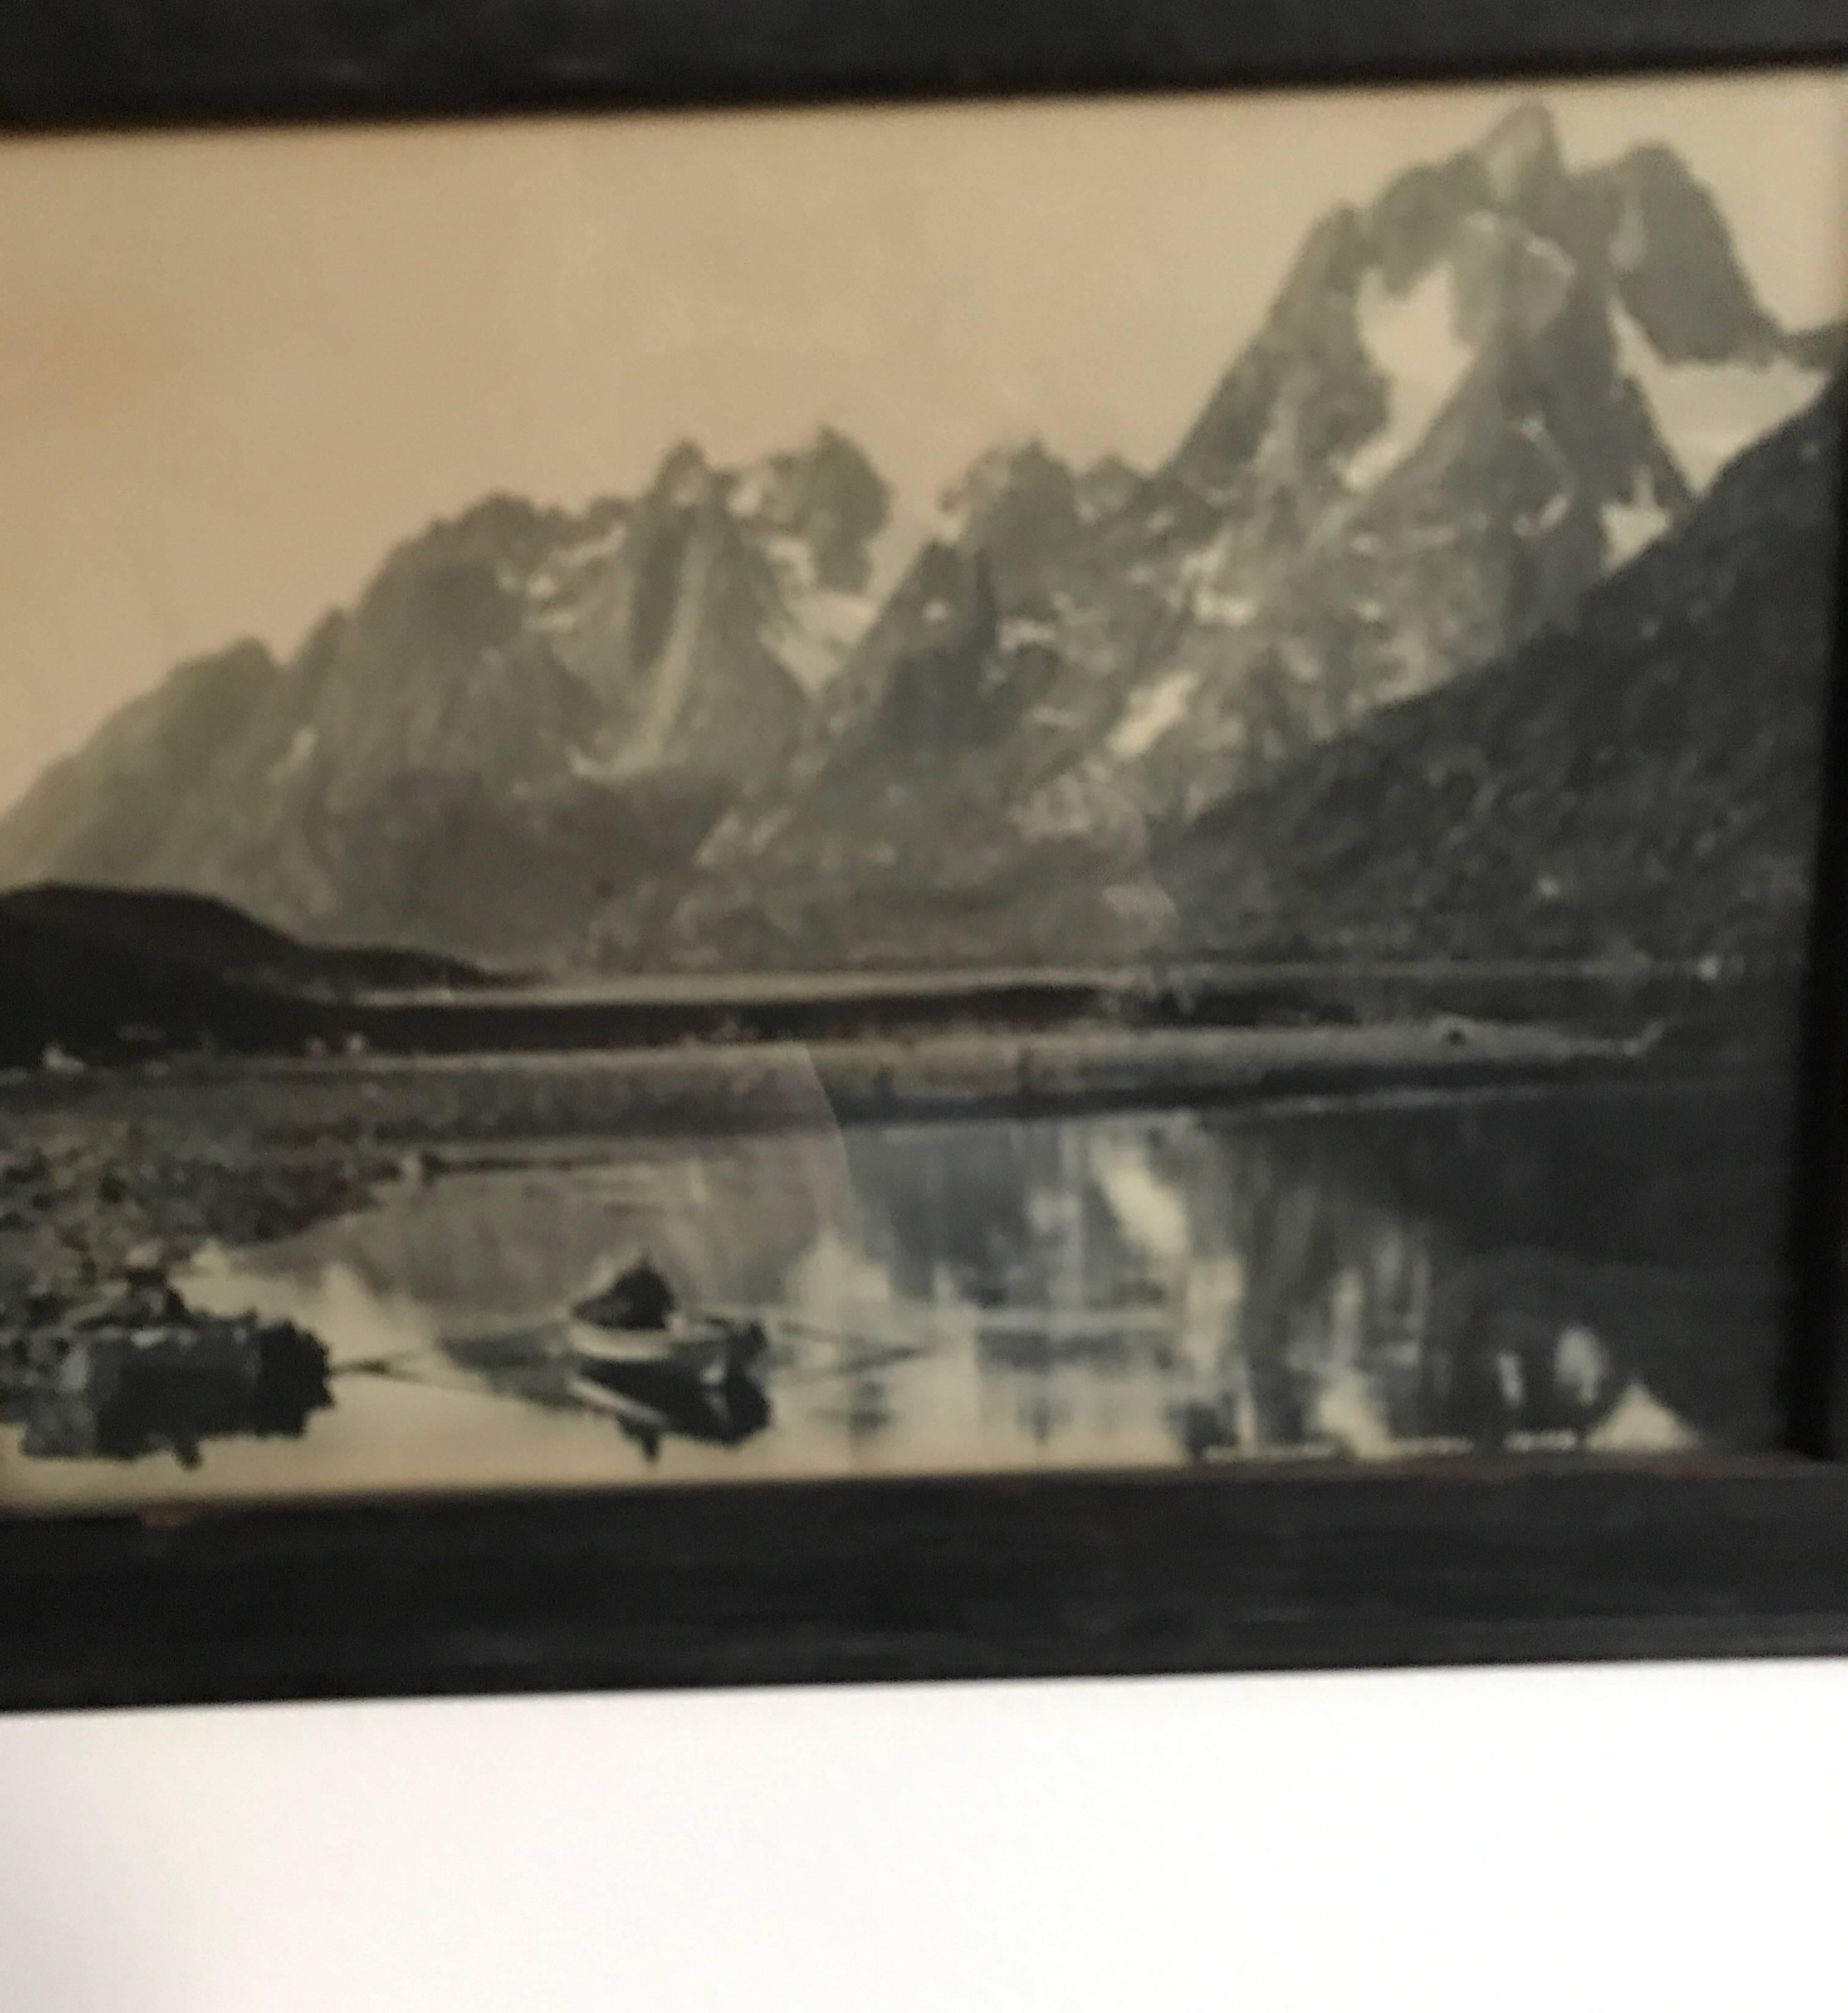 Late 19th Century 19th Century Panaramic Scenic Black and White Photograph of Loen Lake Nordfjord For Sale